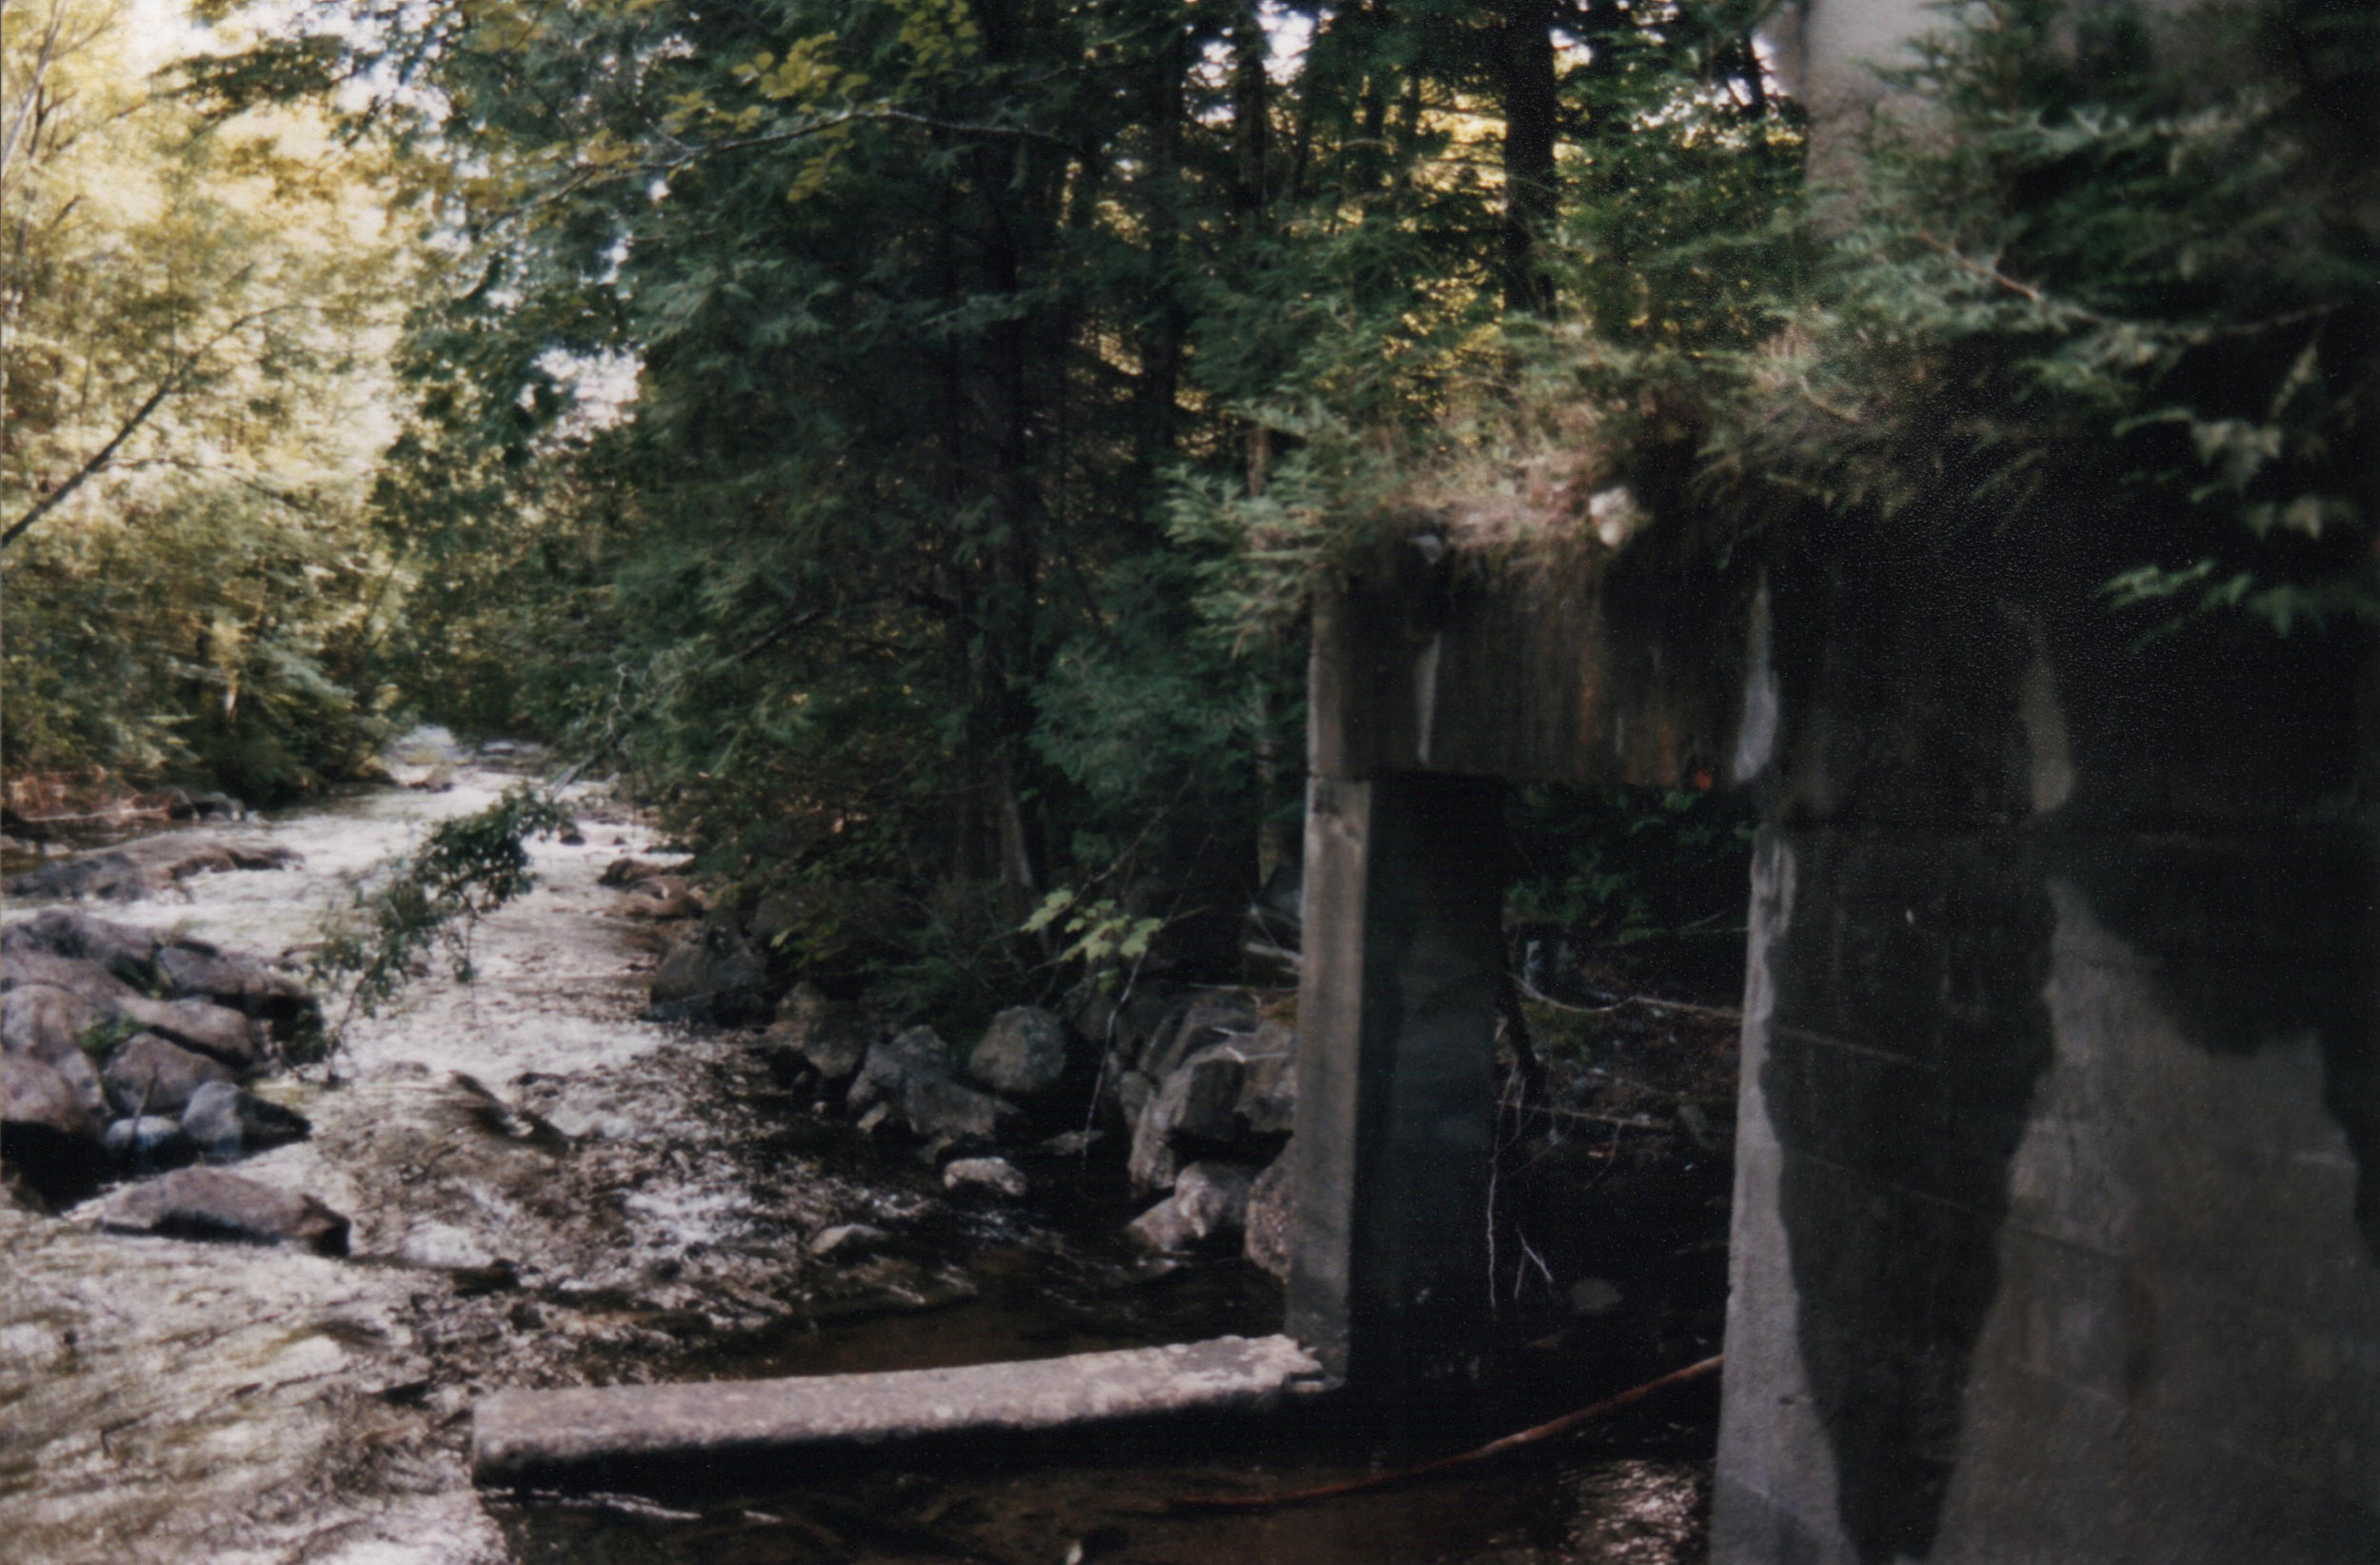 Calamity – The stream which powered the old waterwheels is called Calamity Brook.